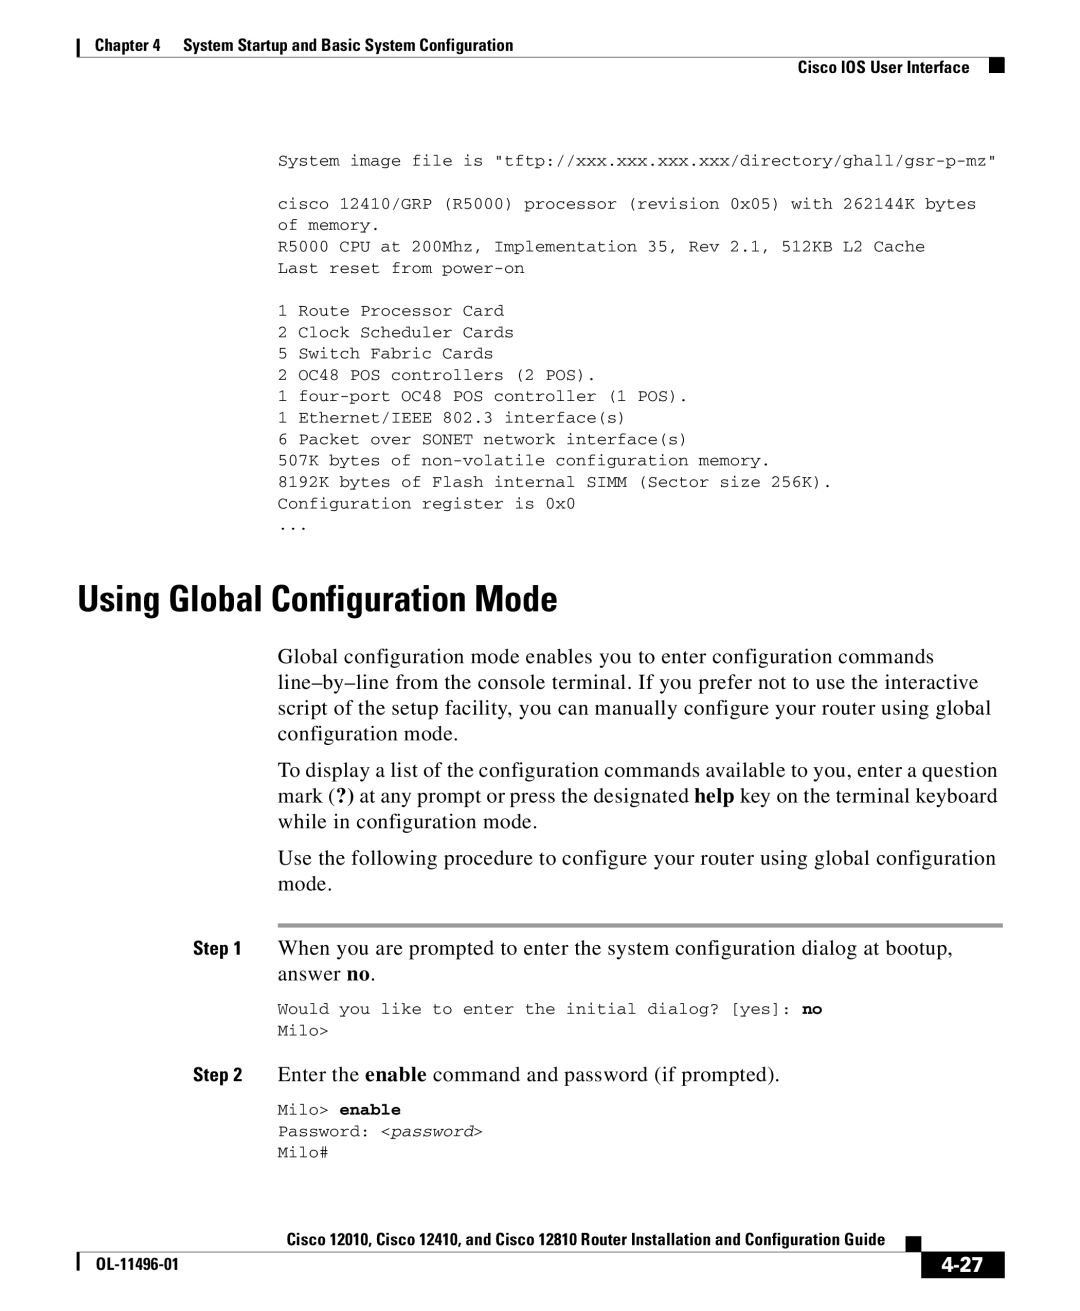 Cisco Systems 12010, 12810, 12410 manual Using Global Configuration Mode, Enter the enable command and password if prompted 